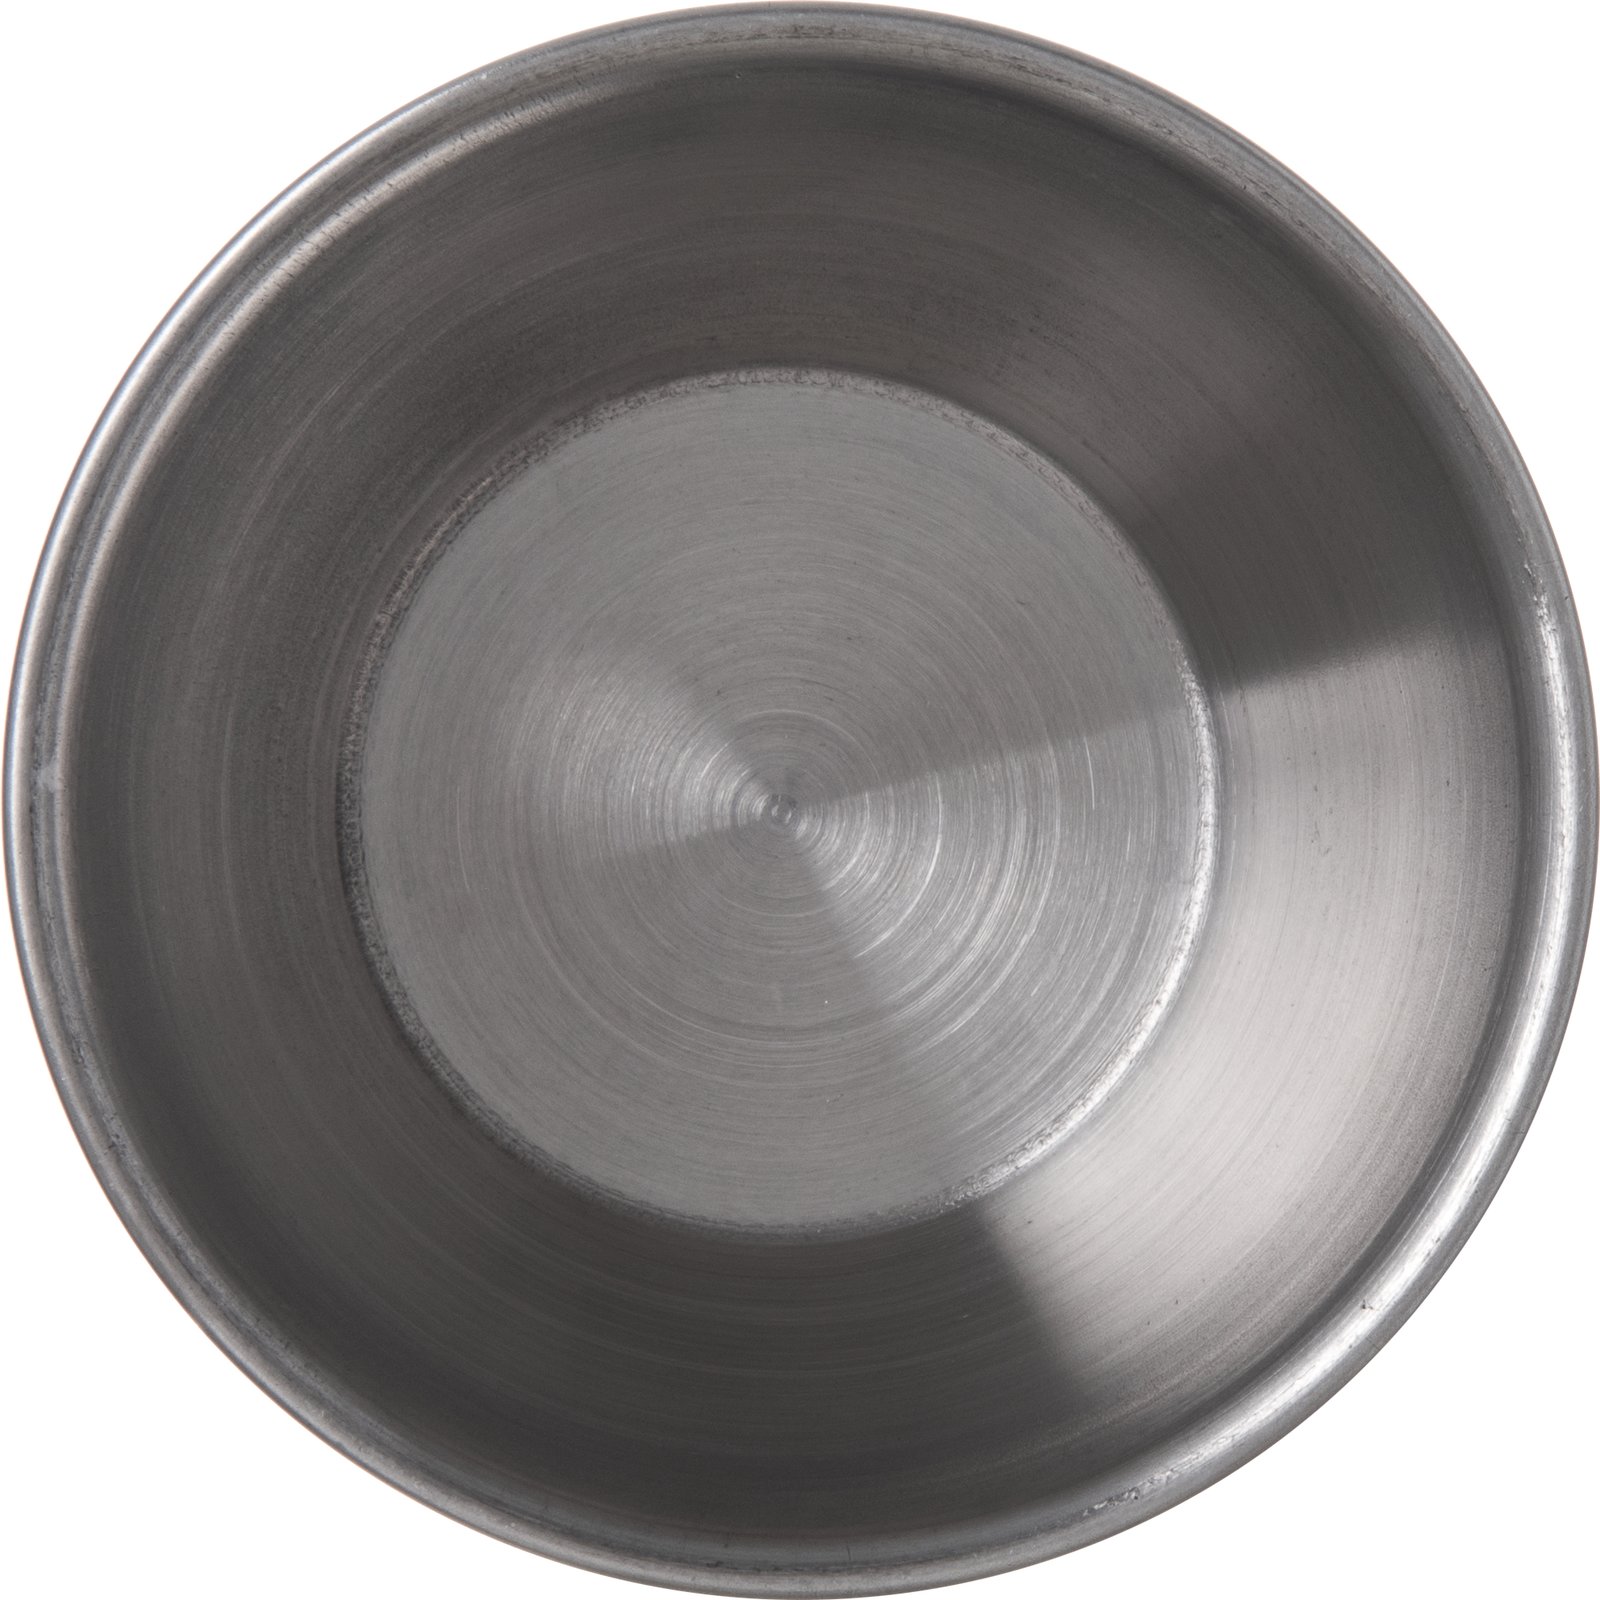 602400 - Stainless Steel Sauce Cup 1.5 oz - Stainless Steel | Carlisle ...